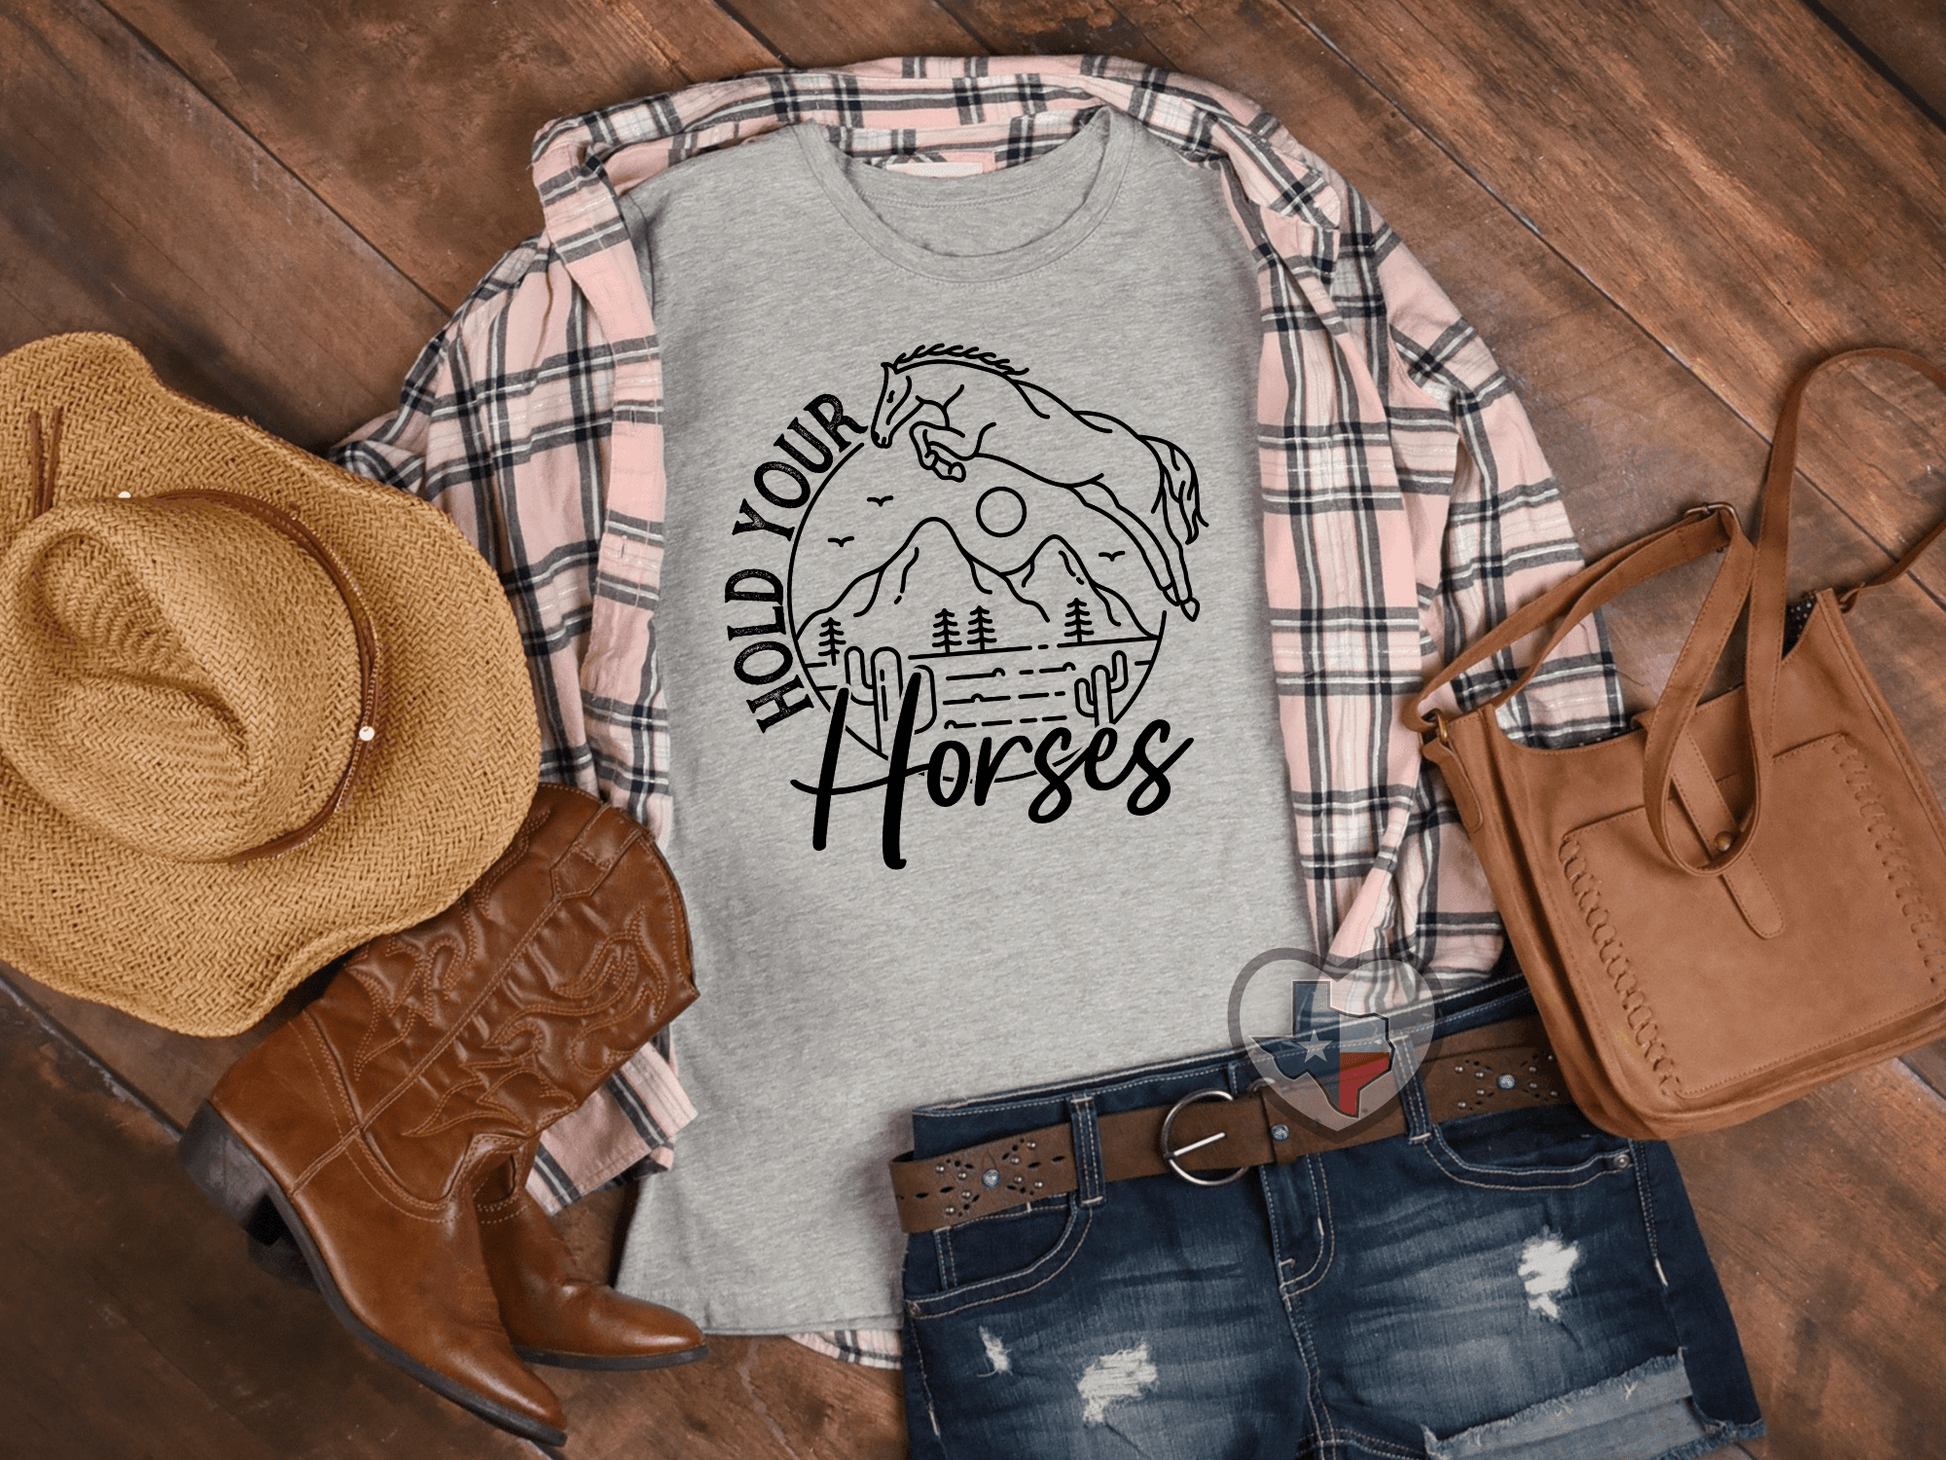 Hold Your Horses - Texas Transfers and Designs